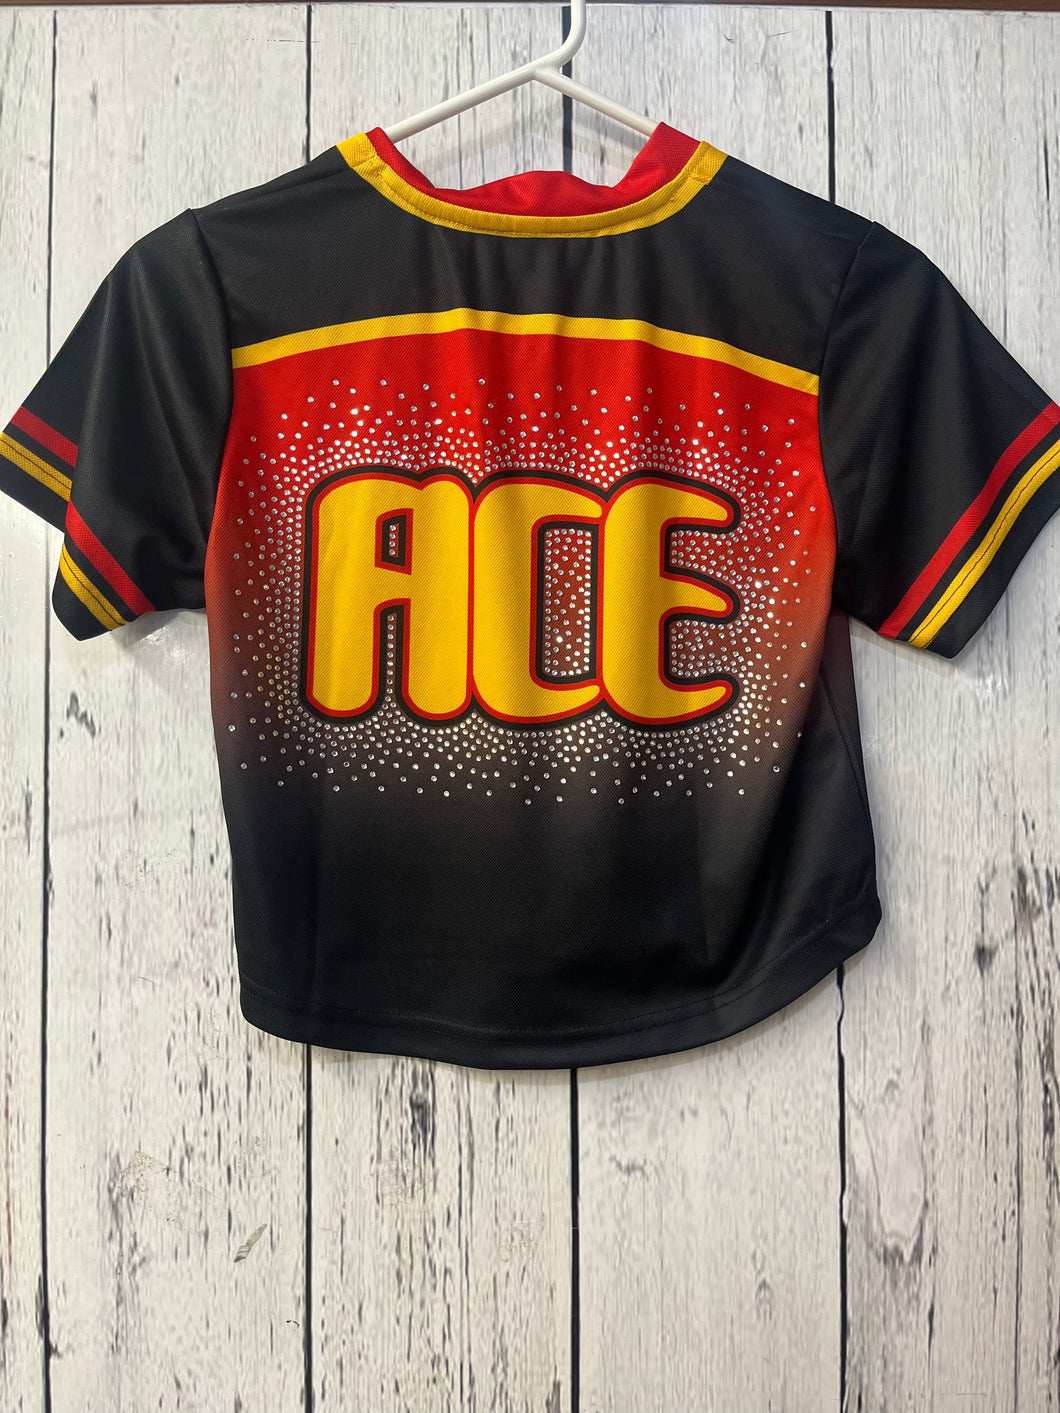 ACE cropped Jersey with Rhinestones